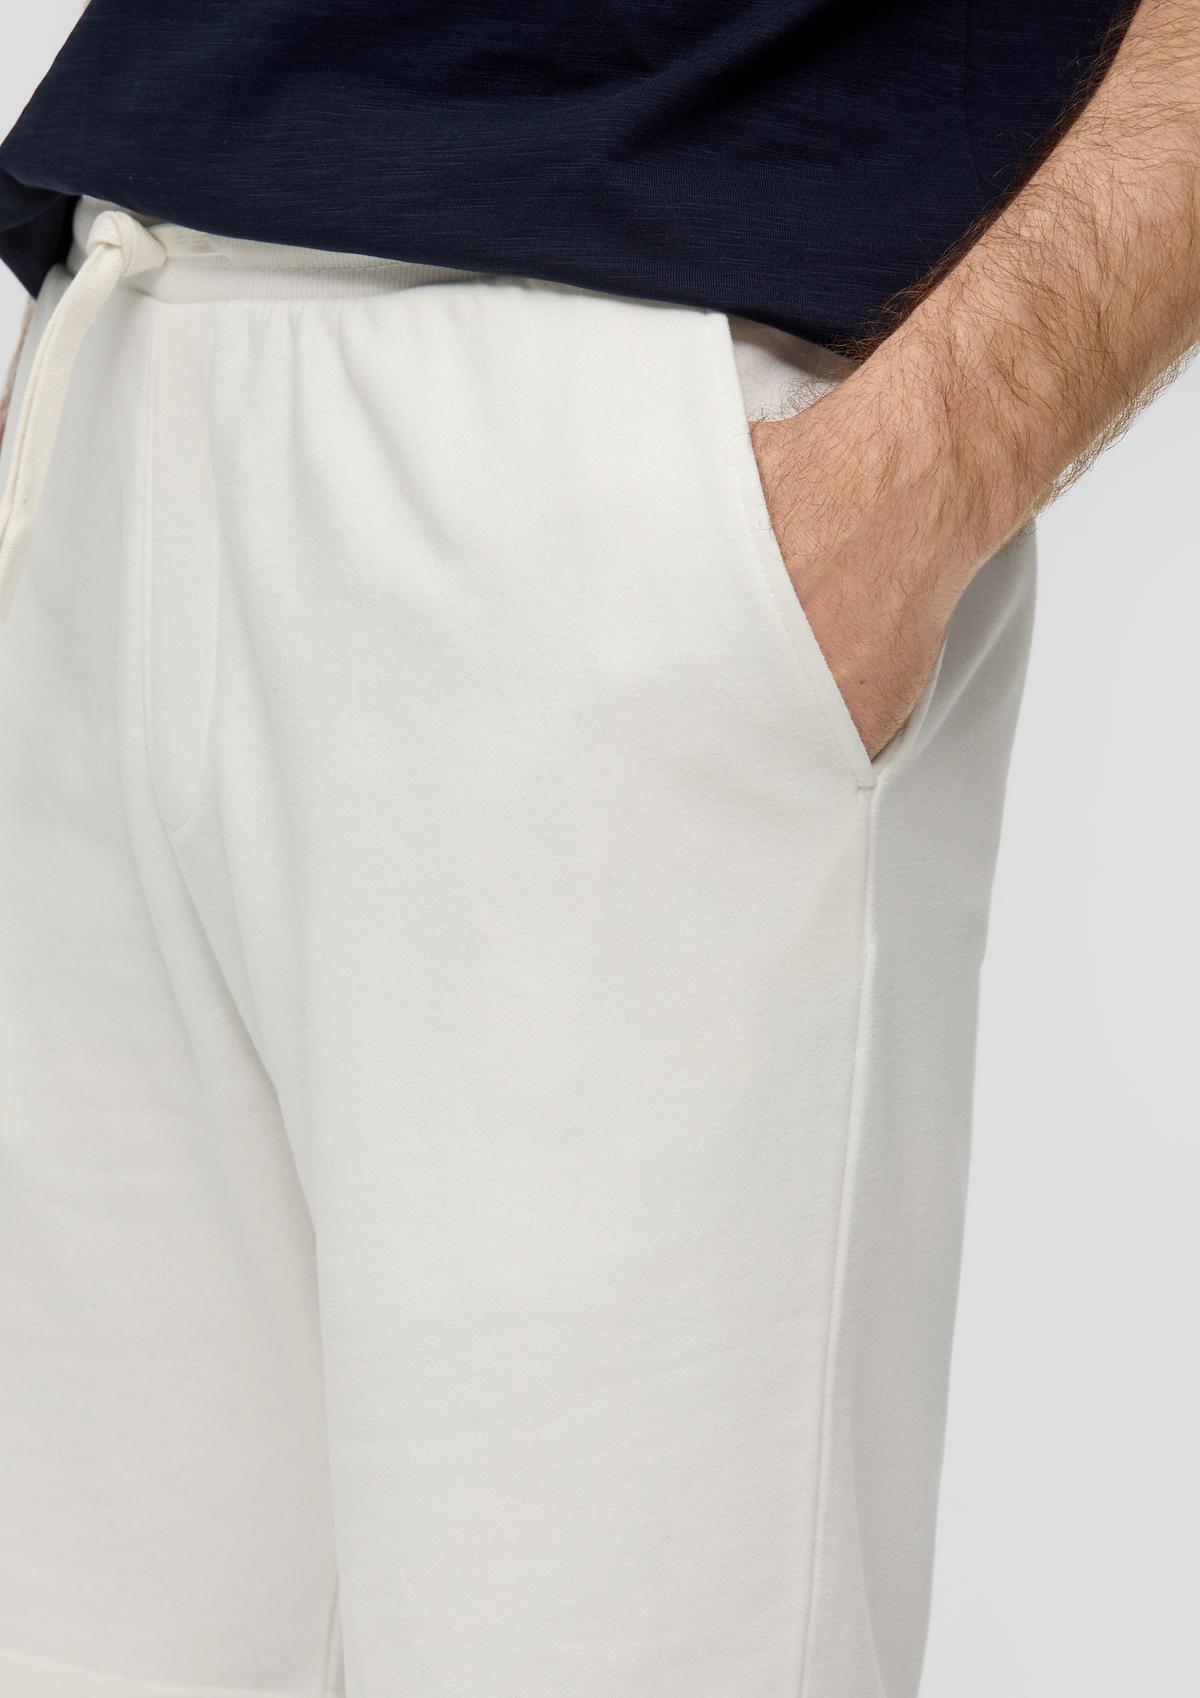 s.Oliver Relaxed fit: sweat shorts with an elasticated waistband